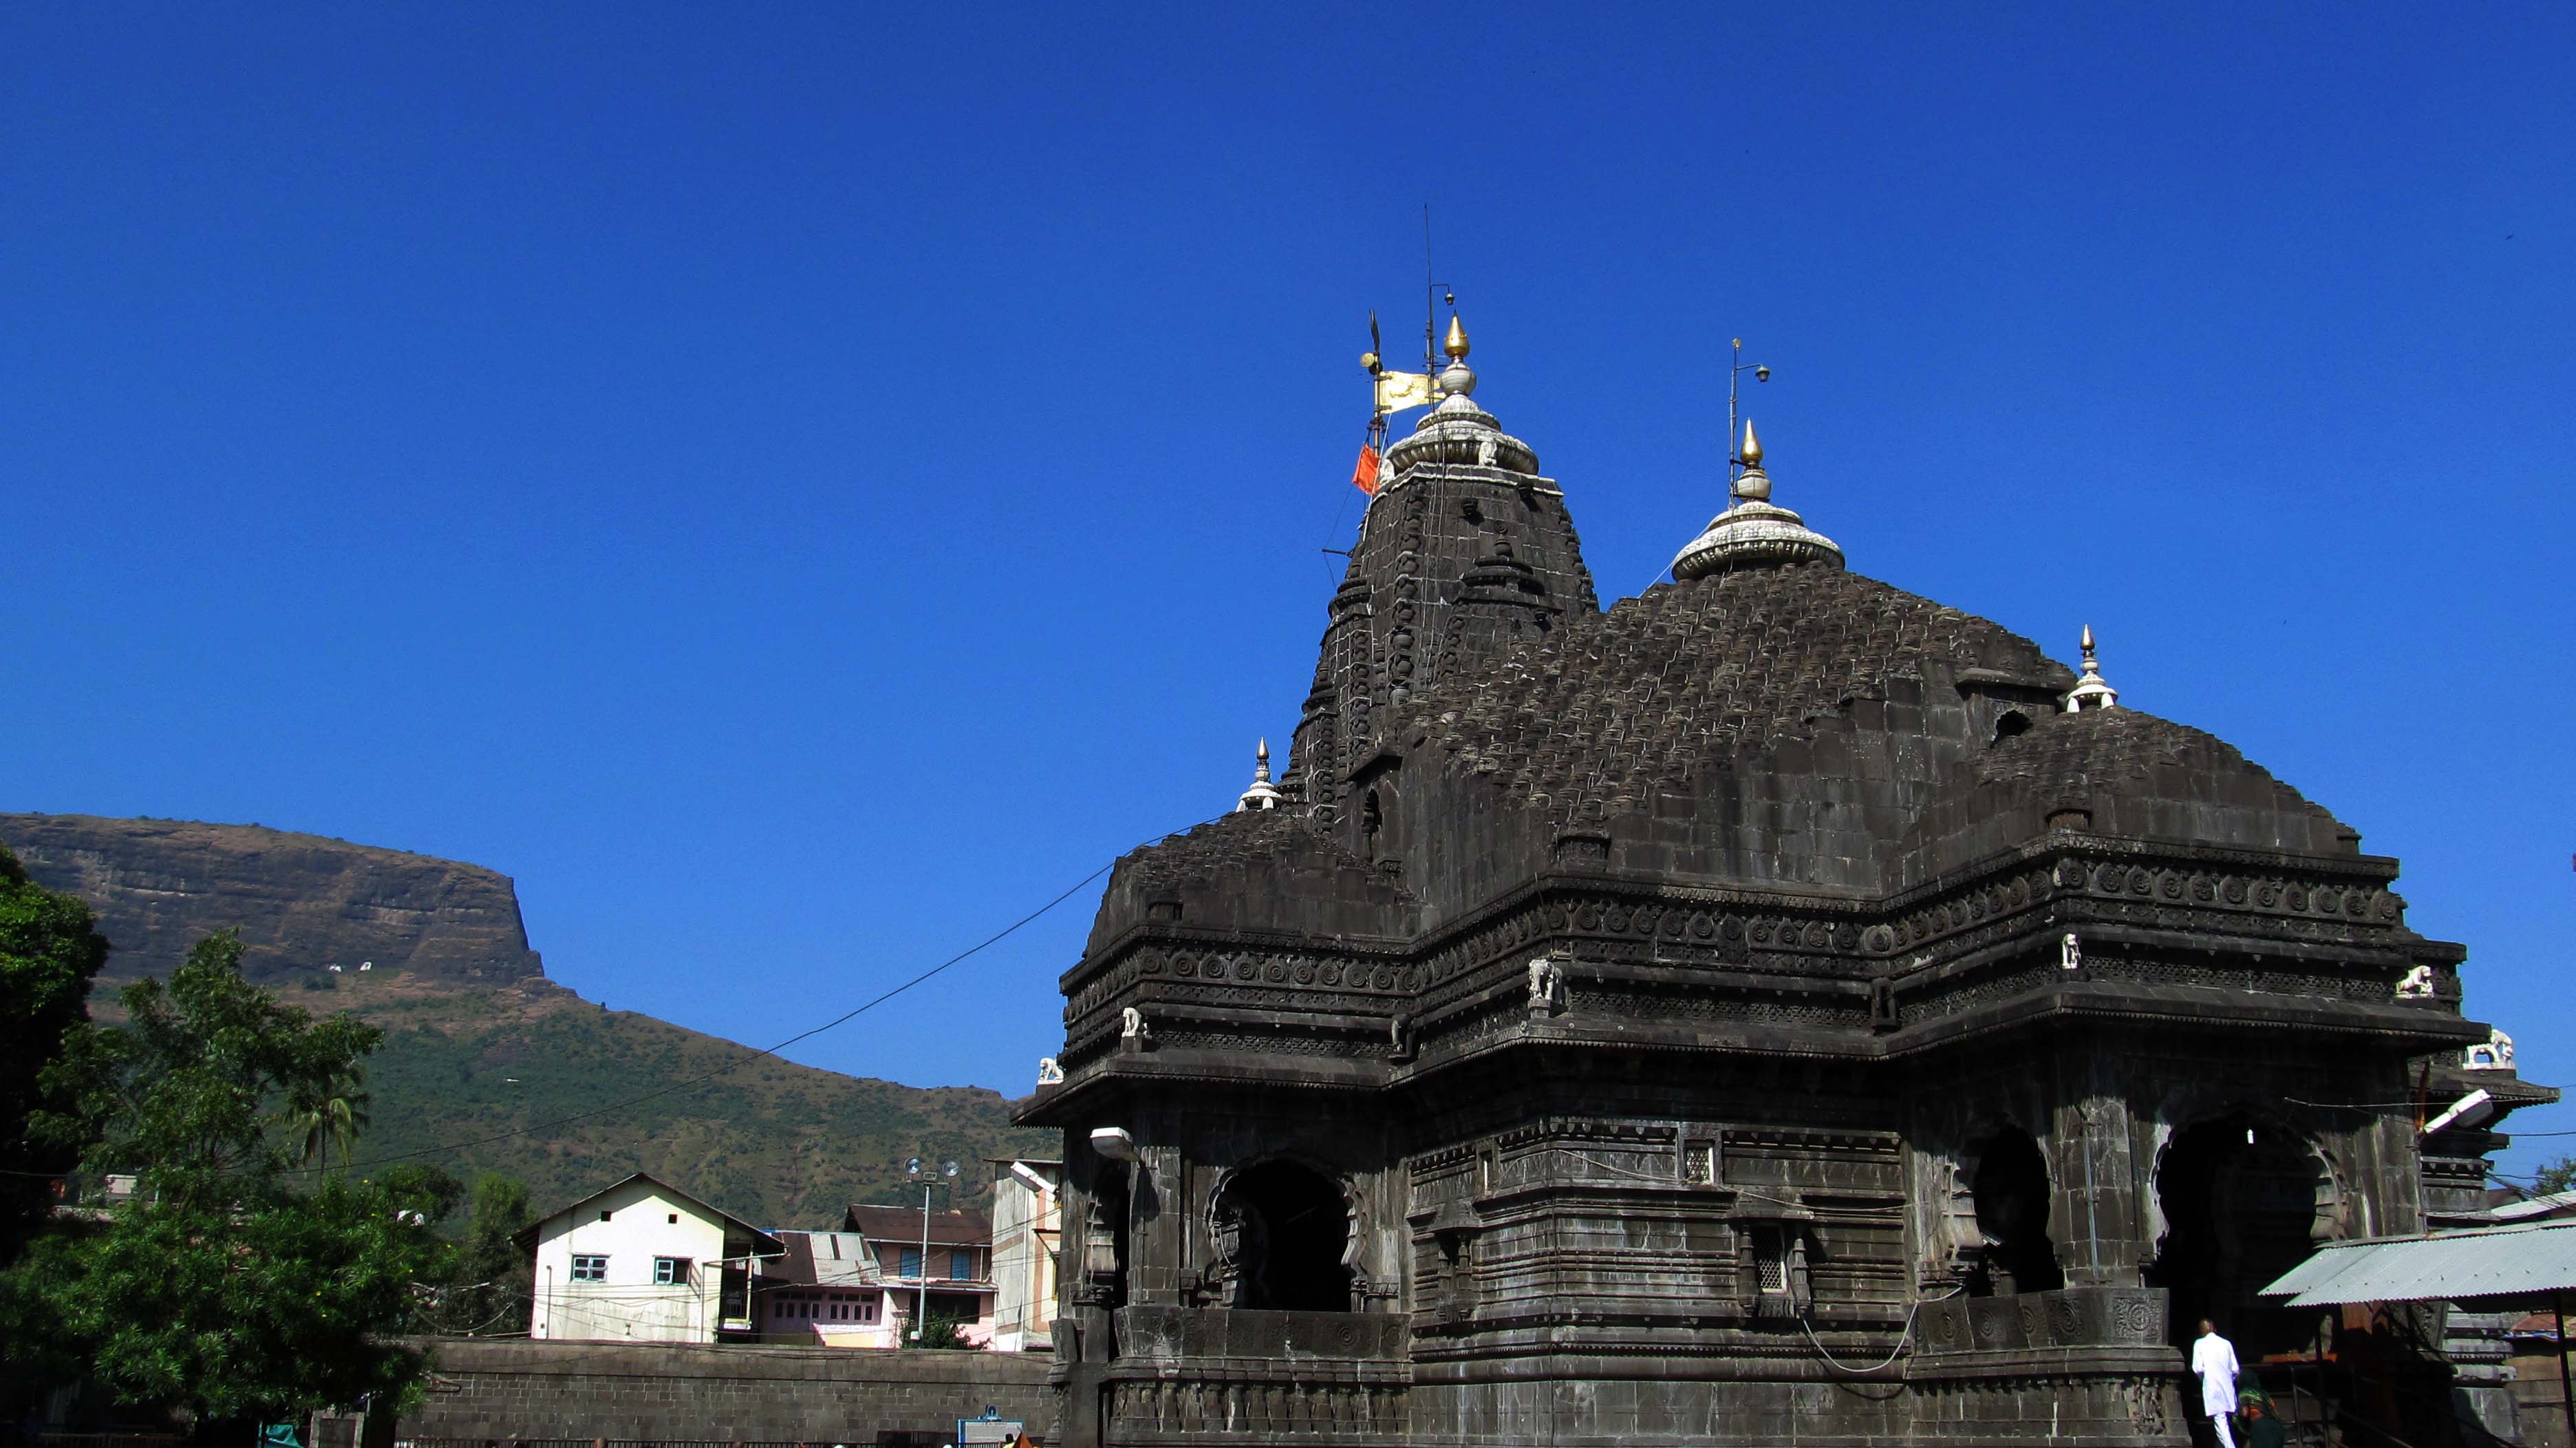 200 Women Will March To Trimbakeshwar Temple In Maharashtra Demanding Their Right To Pray